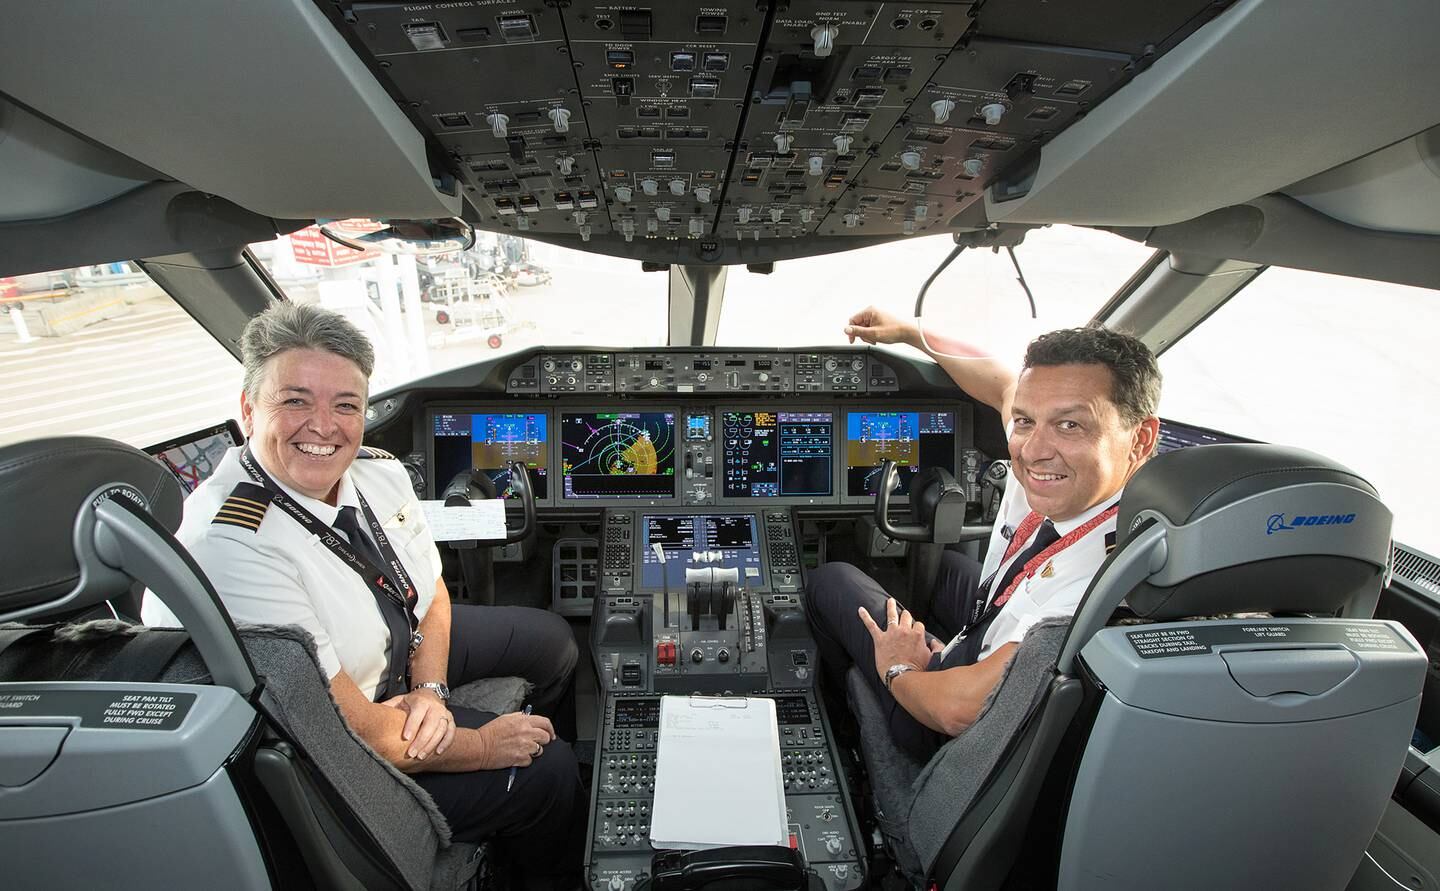 Qantas is also auctioning a simulator experience under the guidance of Captain Lisa Norman. Courtesy Qantas